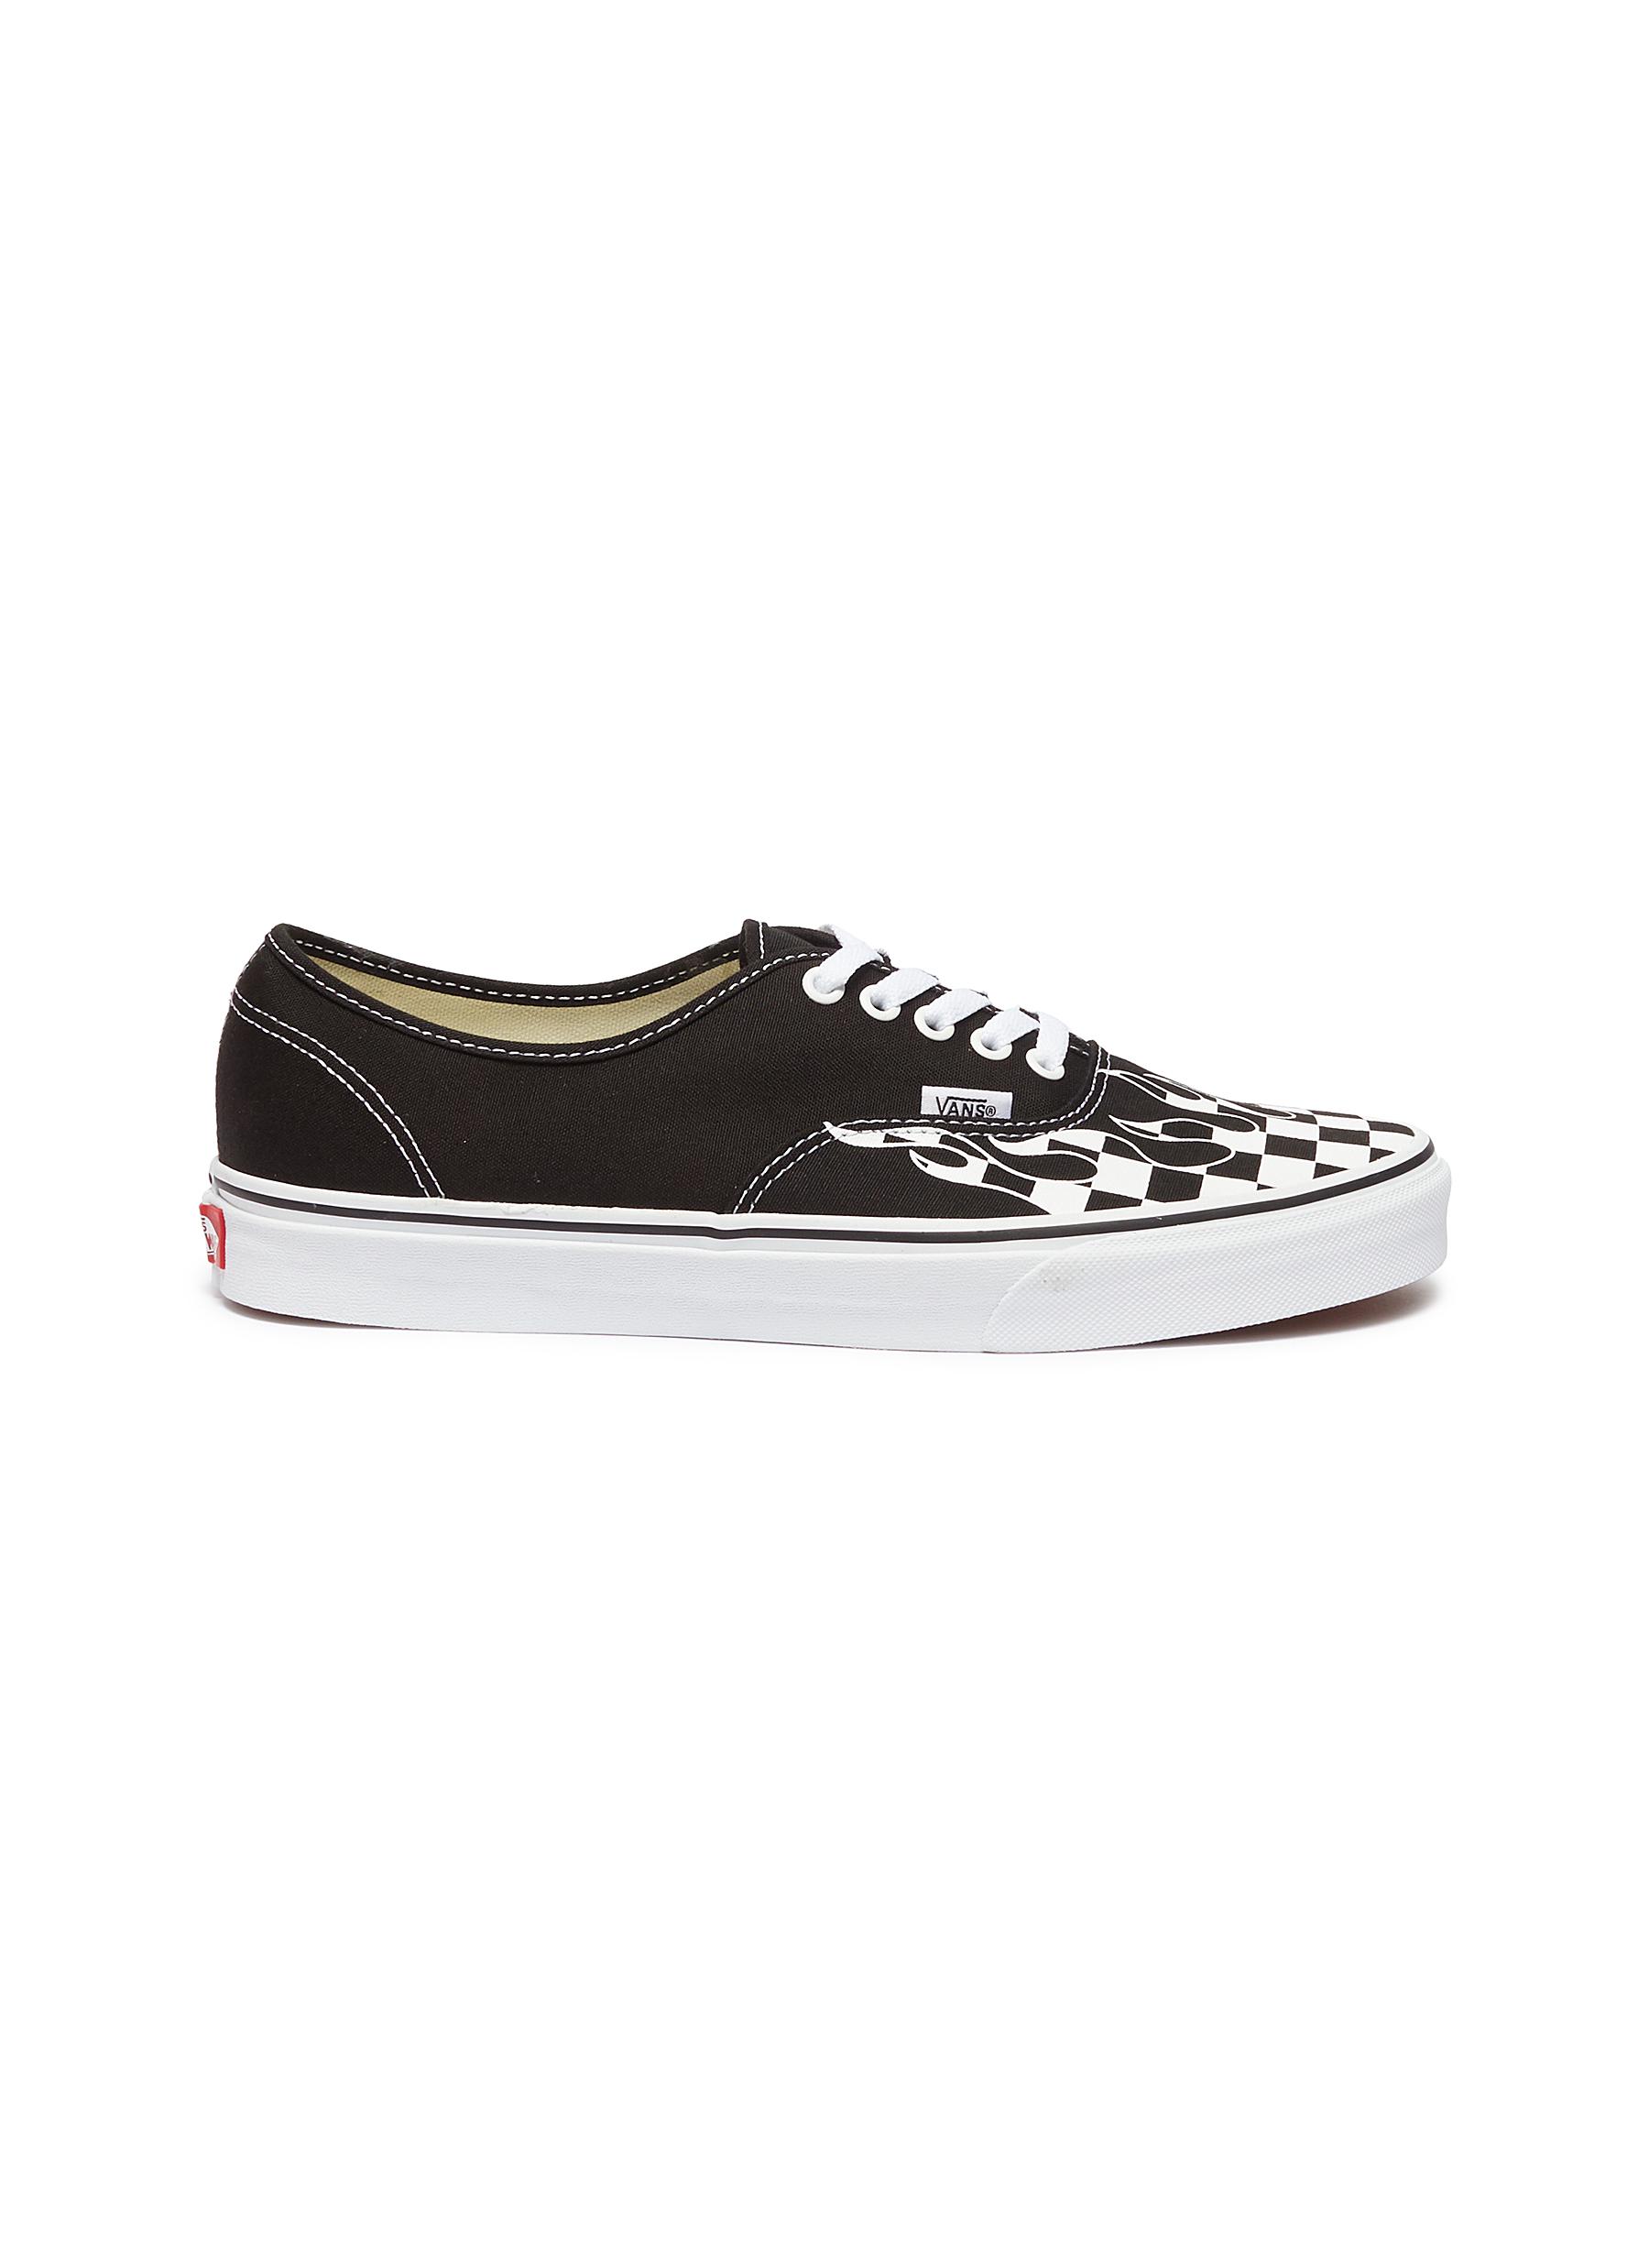 vans authentic checkerboard flame black & white skate shoes